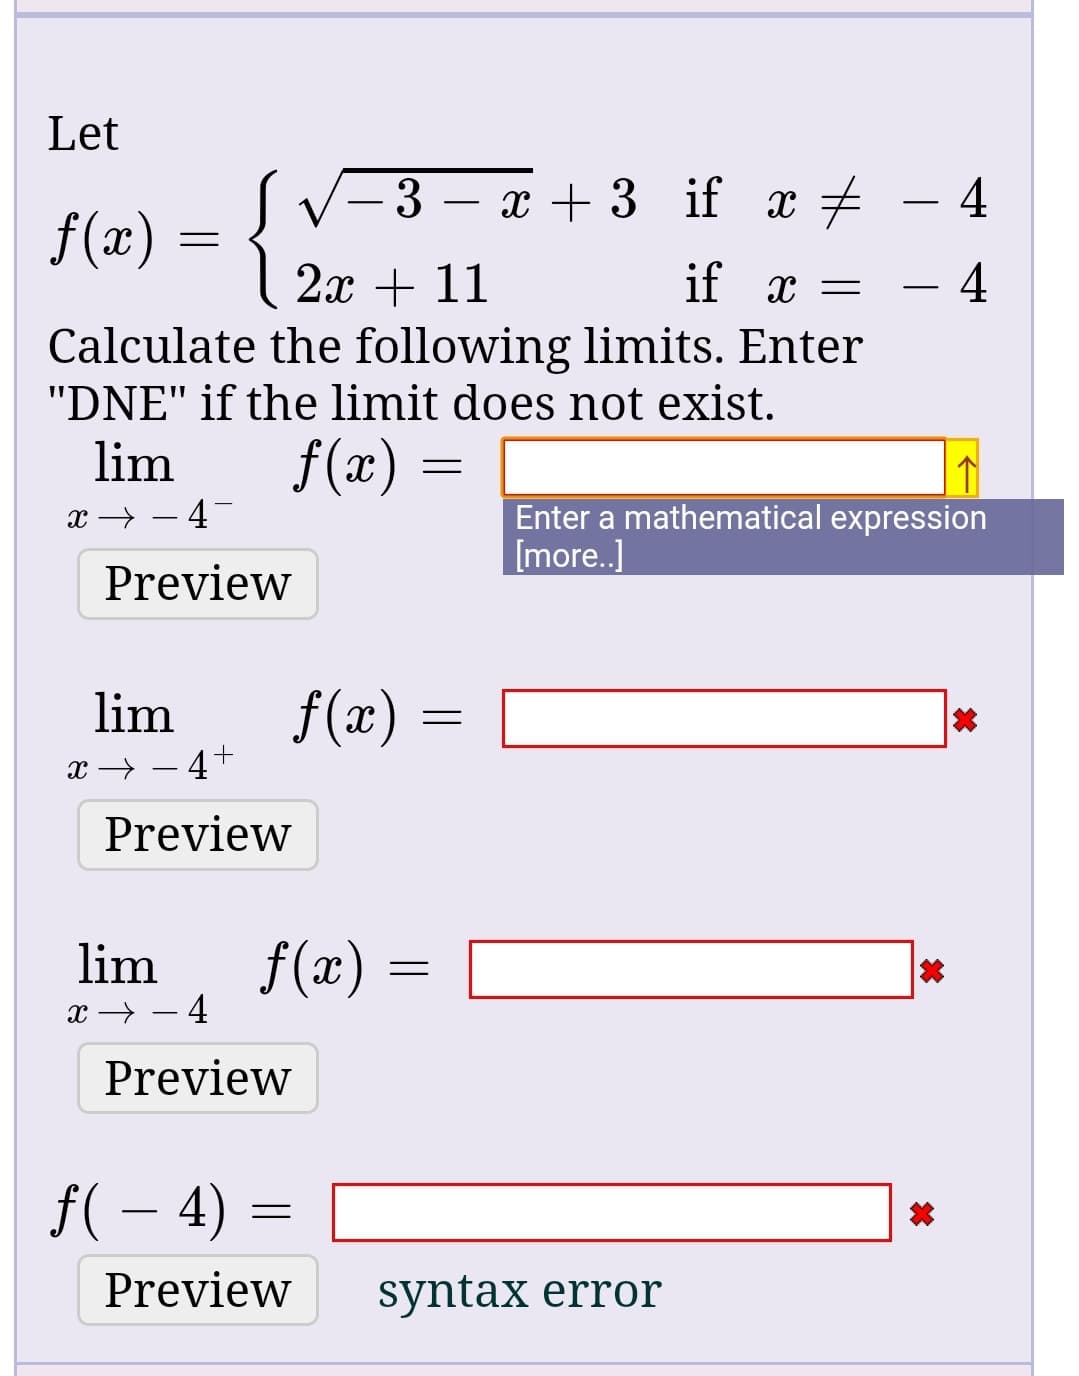 Let
3 – x + 3 if x +
f(x) =
2x + 11
Calculate the following limits. Enter
"DNE" if the limit does not exist.
if x =
f(x) =
lim
Enter a mathematical expression
[more.]
x → – 4-
Preview
f(x)
lim
x → – 4+
Preview
f(x)
lim
Preview
f( – 4)
Preview
syntax error
